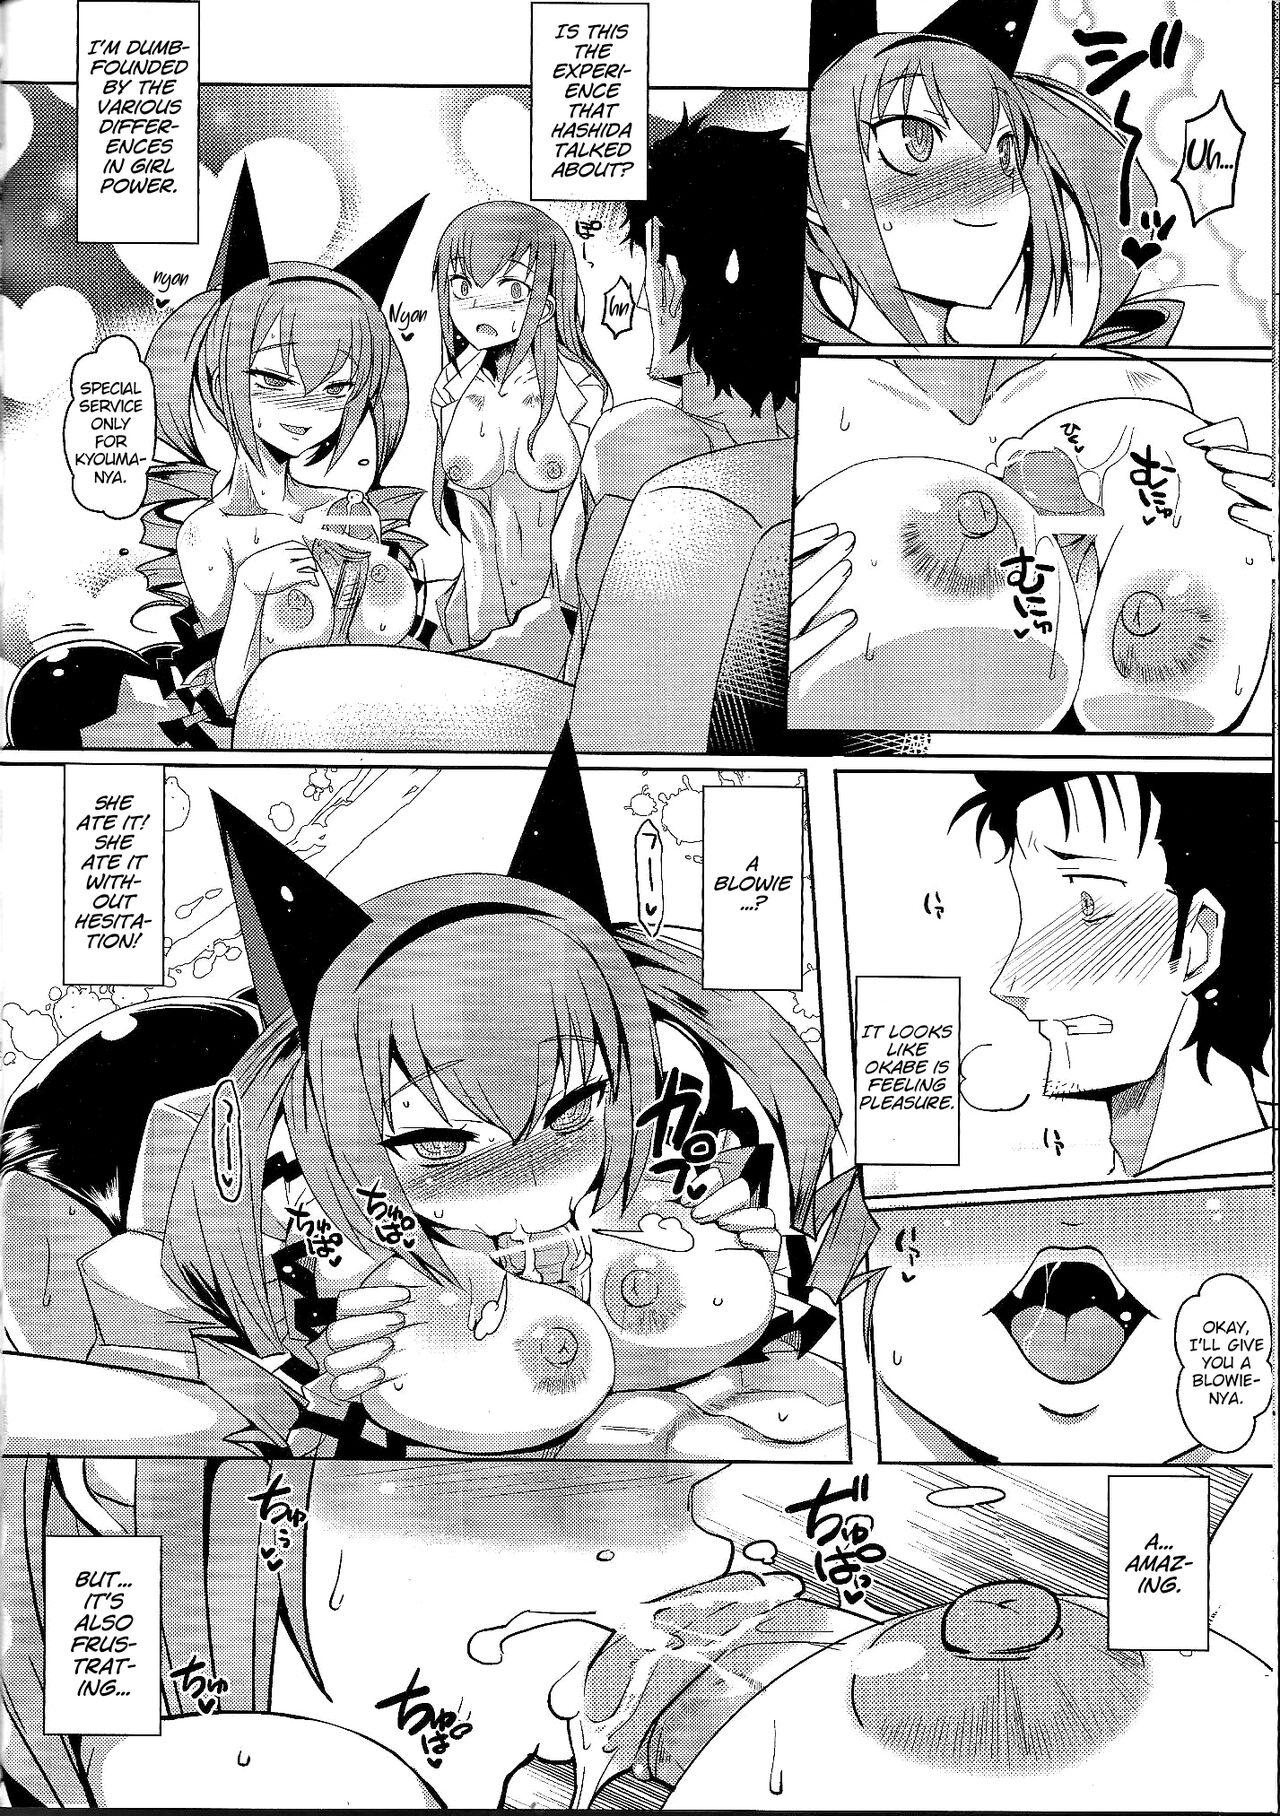 Cuckolding Kenjin Chijou no Sodoministers - Steinsgate Job - Page 9